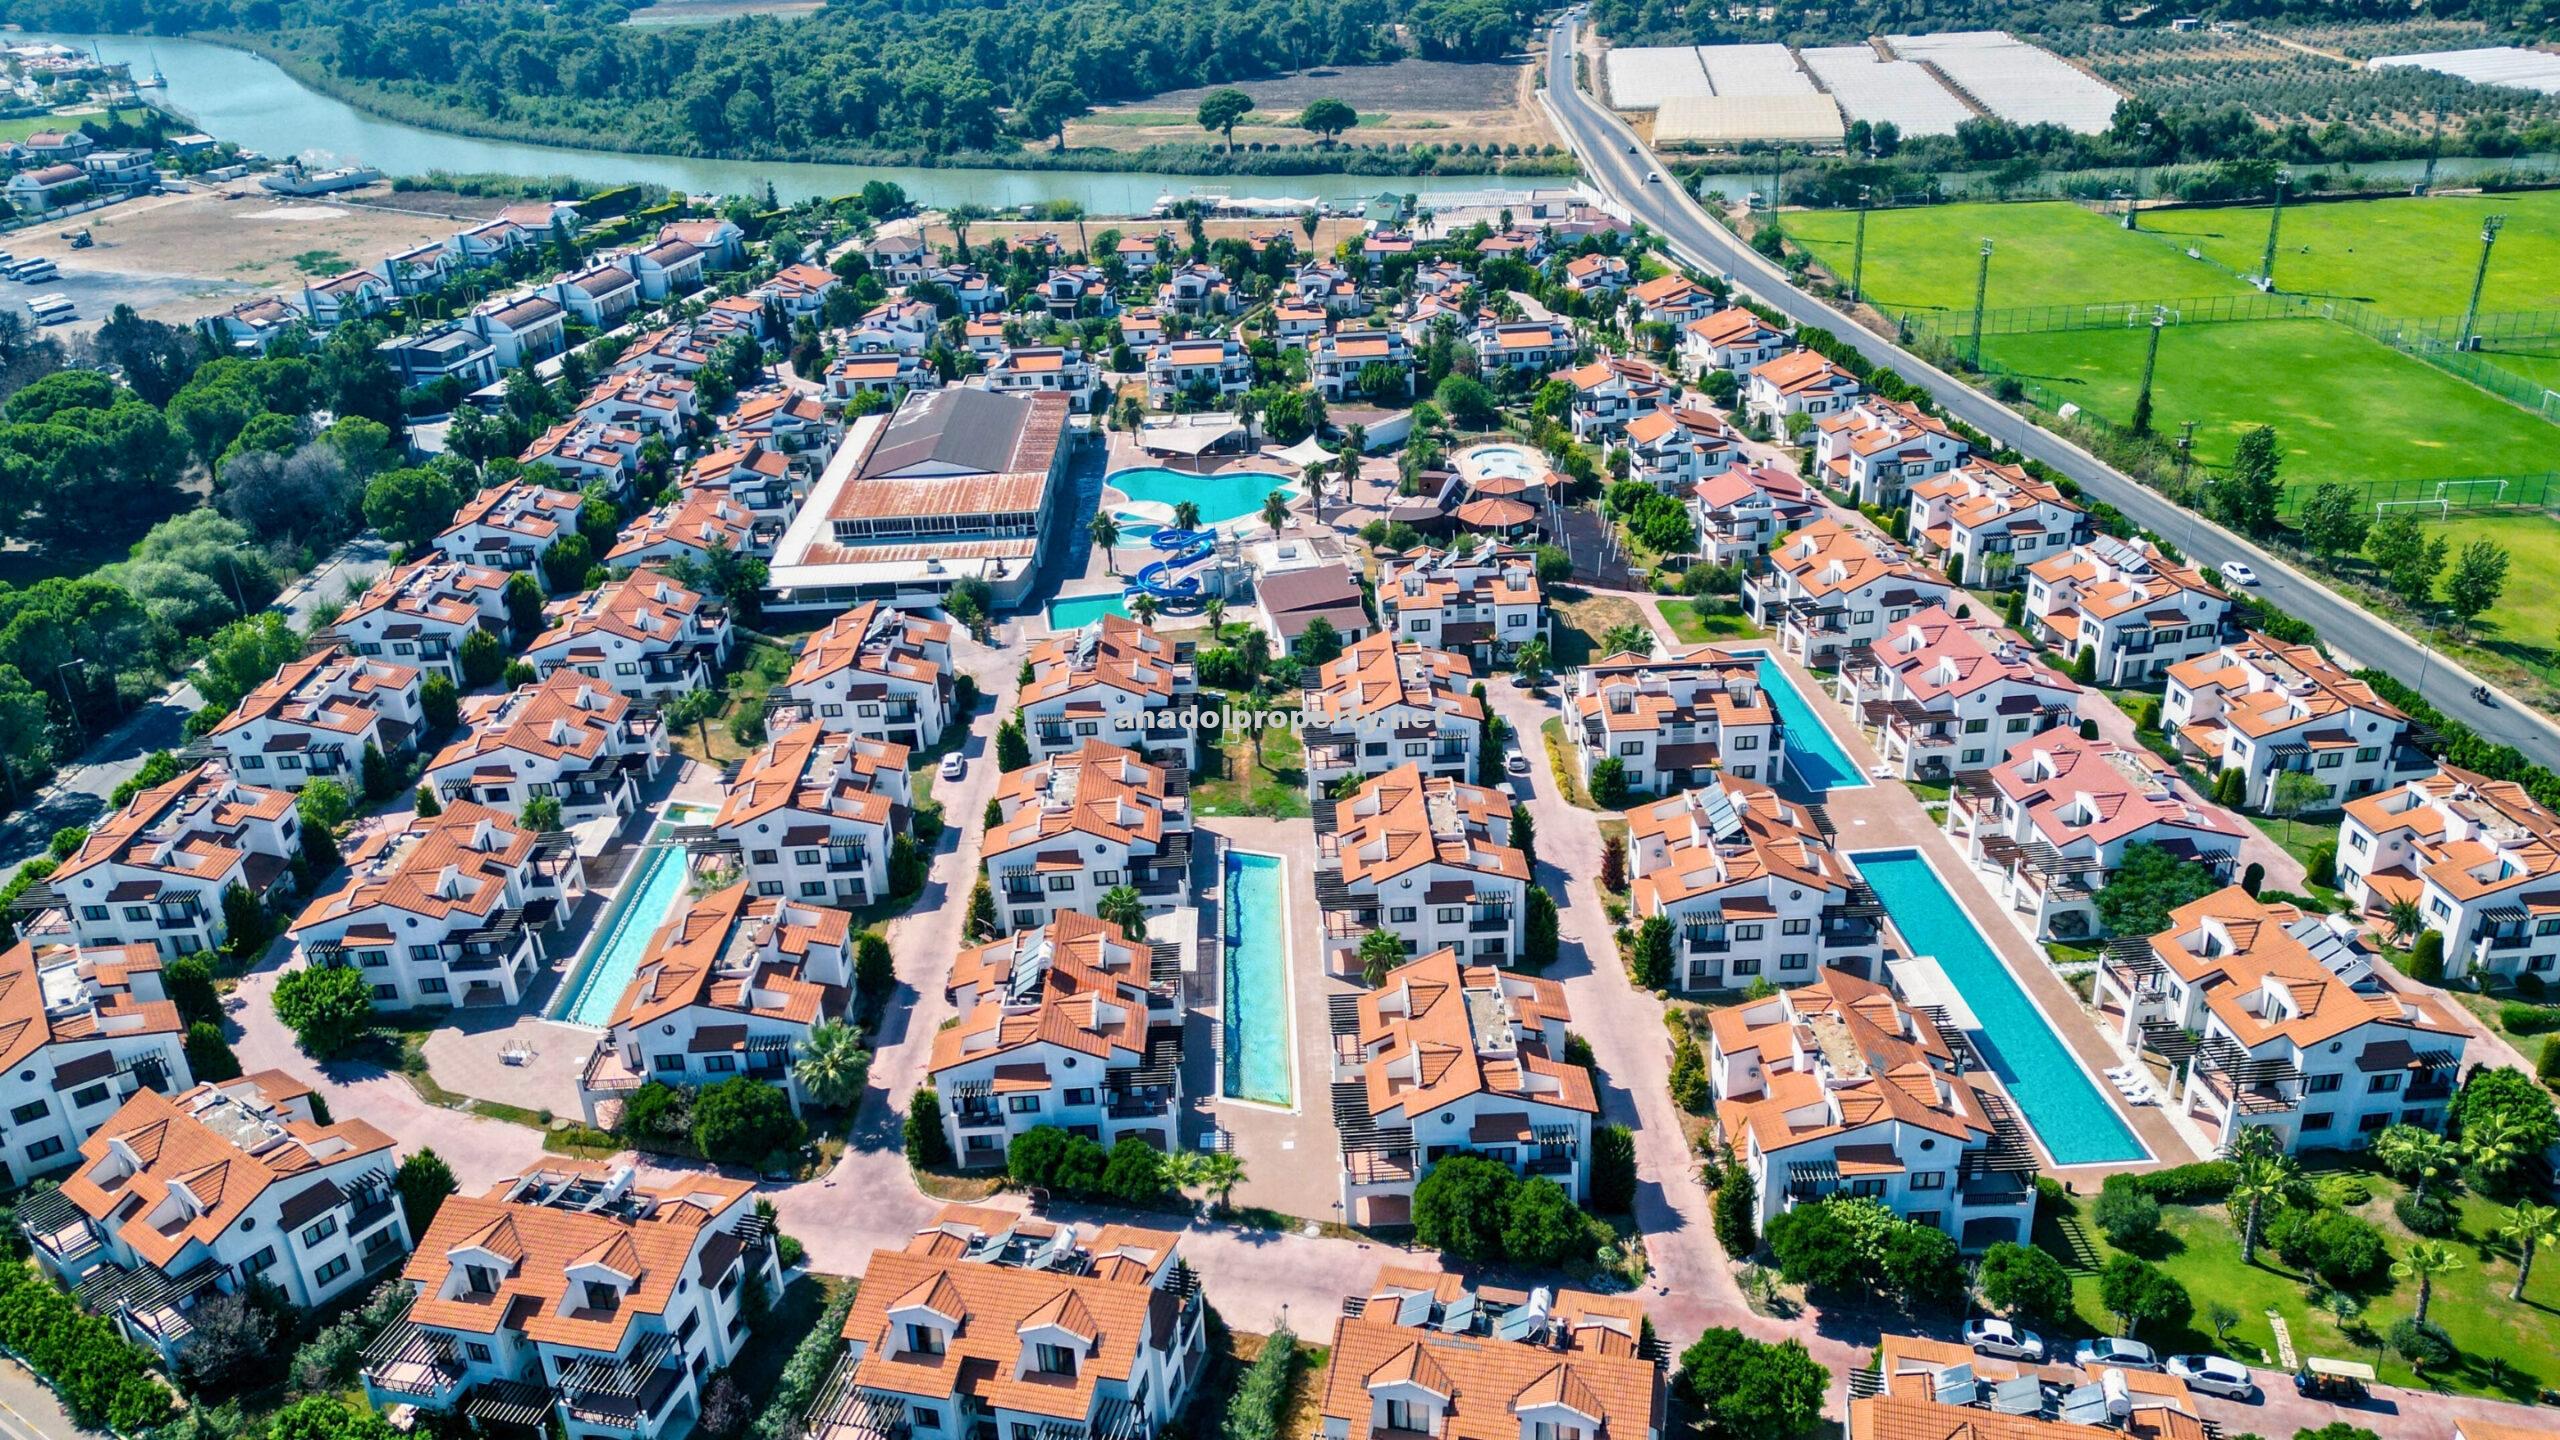 Luxury project consisting of apartments and villas in the Belek